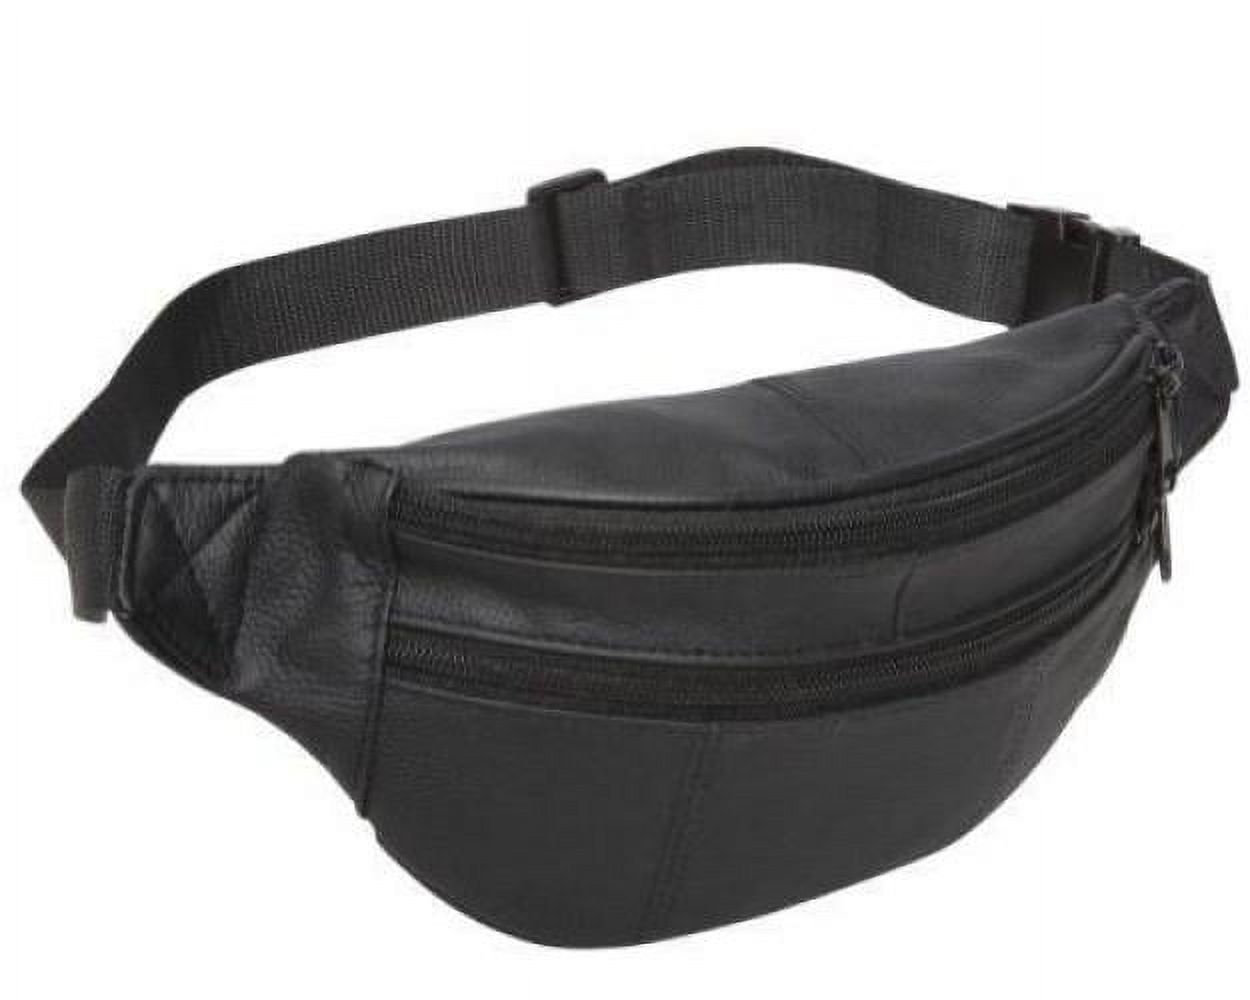 AmeriLeather Top-grain Cowhide Leather Fanny Pack with 40-inch Belt - image 1 of 4